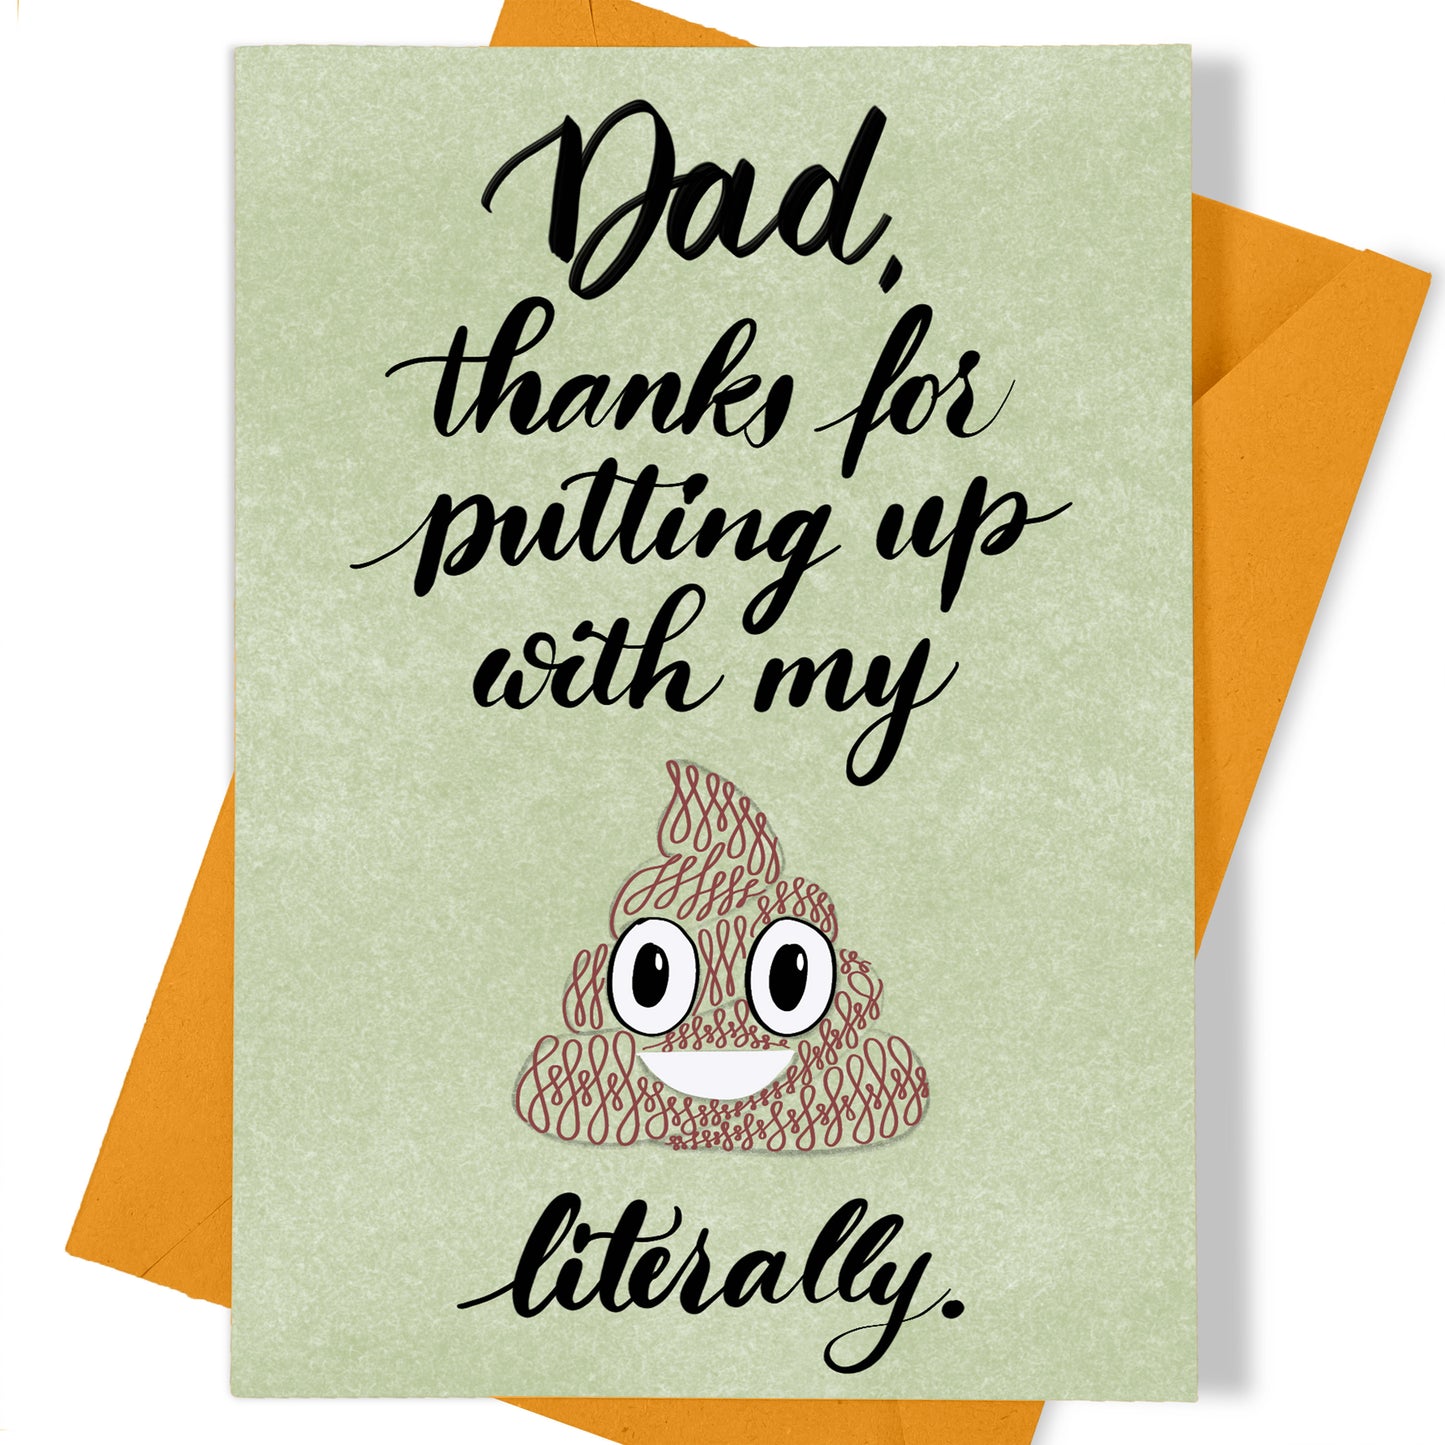 A thumbnail view of the Toronto Calligraphy greeting card: "Dad, thanks for putting up with my crap. Literally."